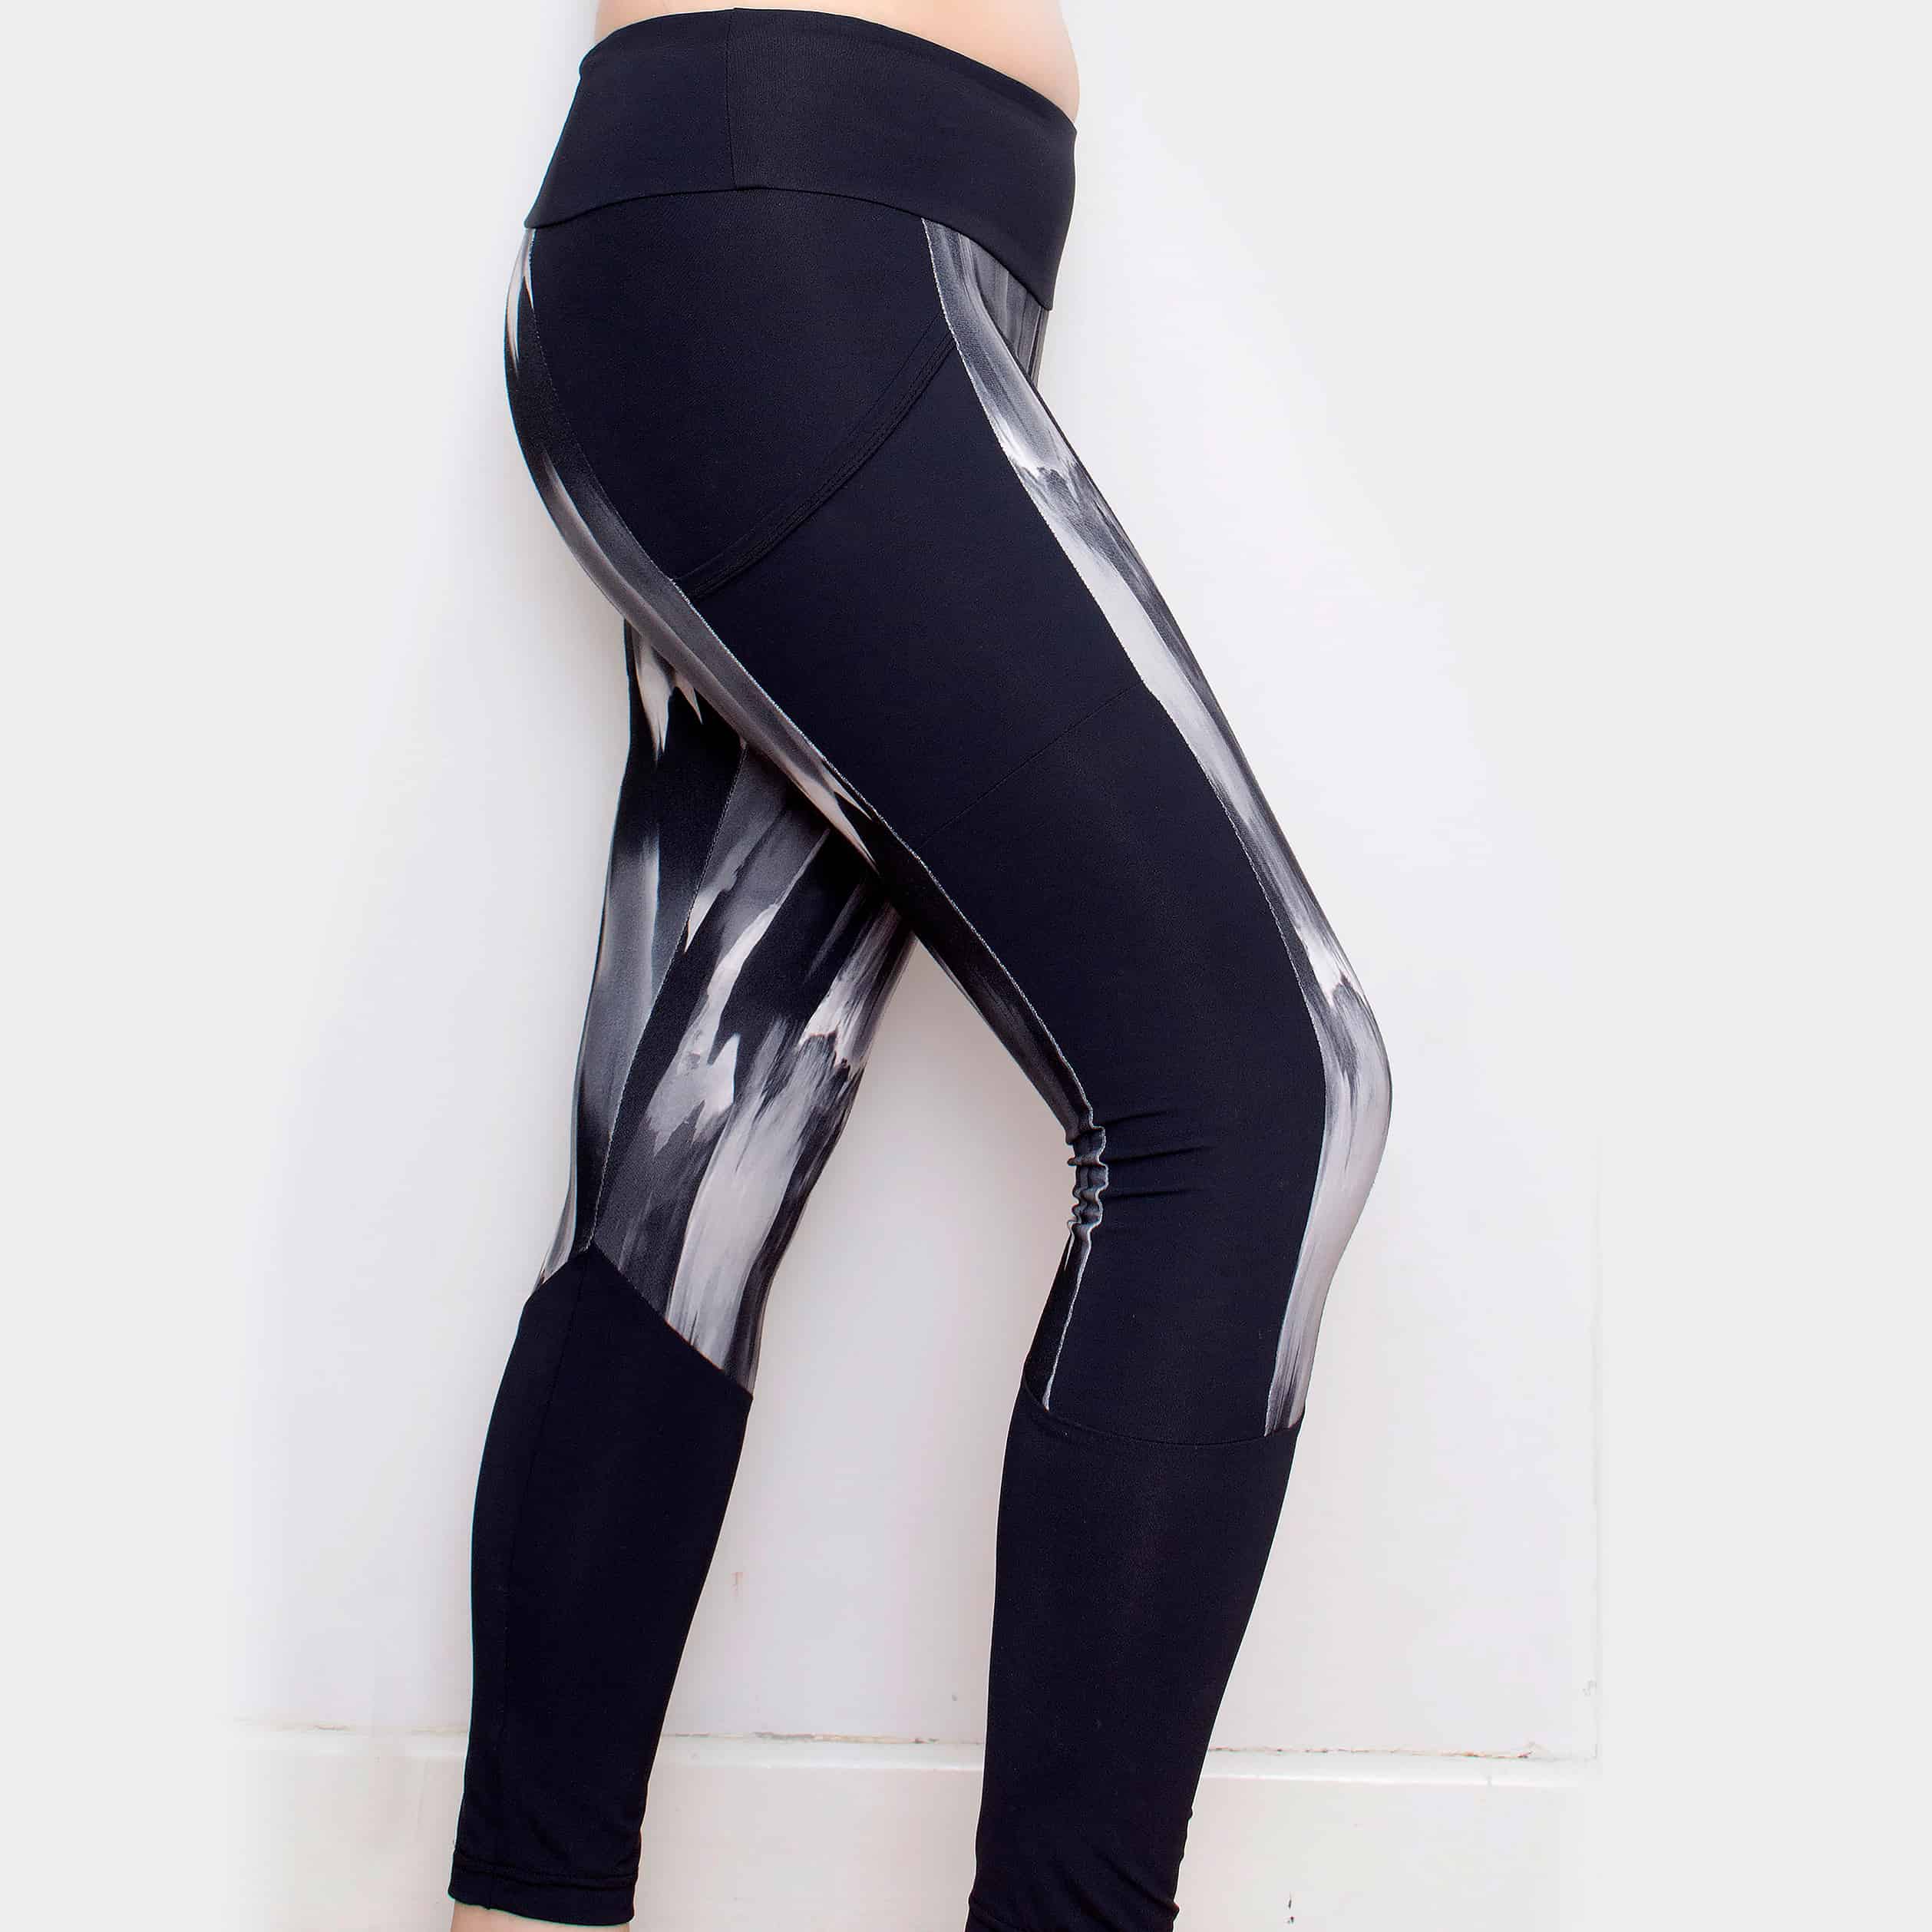 Best Diy workout leggings for Build Muscle